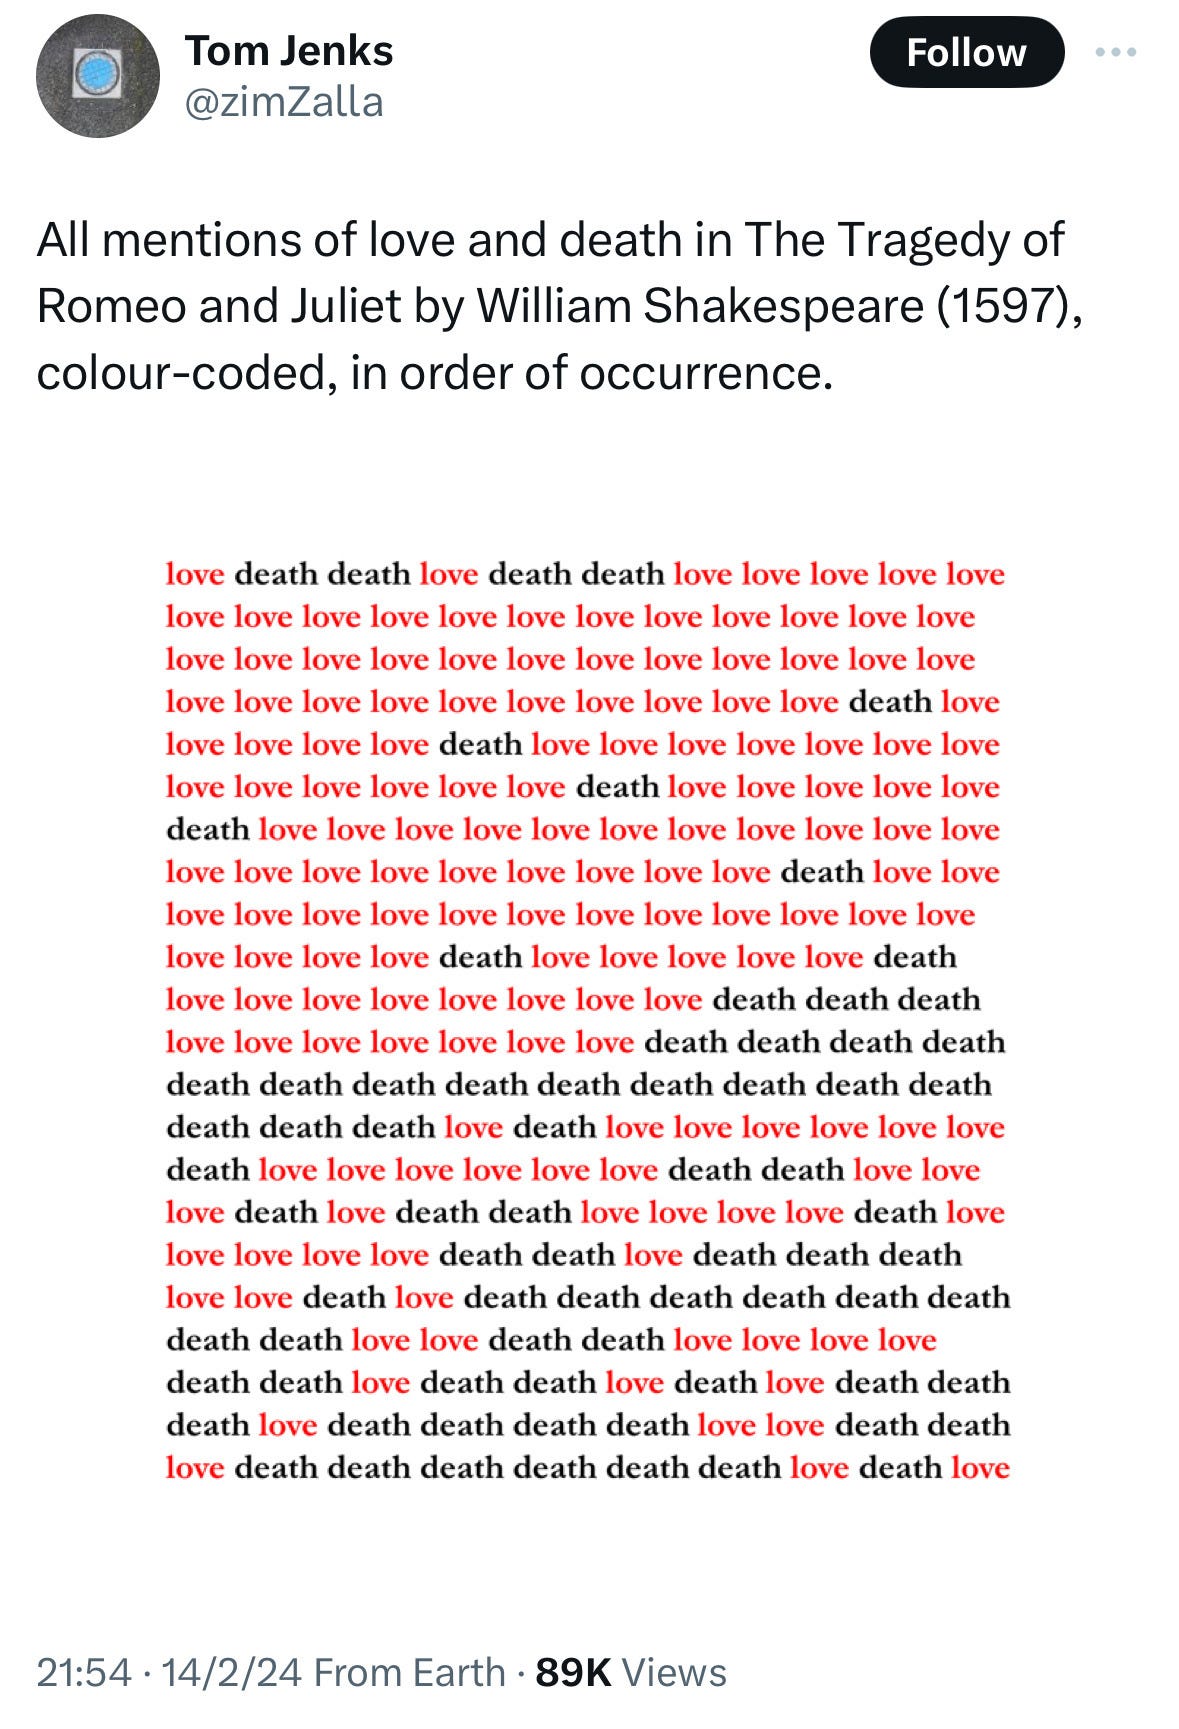 All mentions of love and death in The Tragedy of Romeo and Juliet by William Shakespeare (1597), colour-coded, in order of occurrence. 